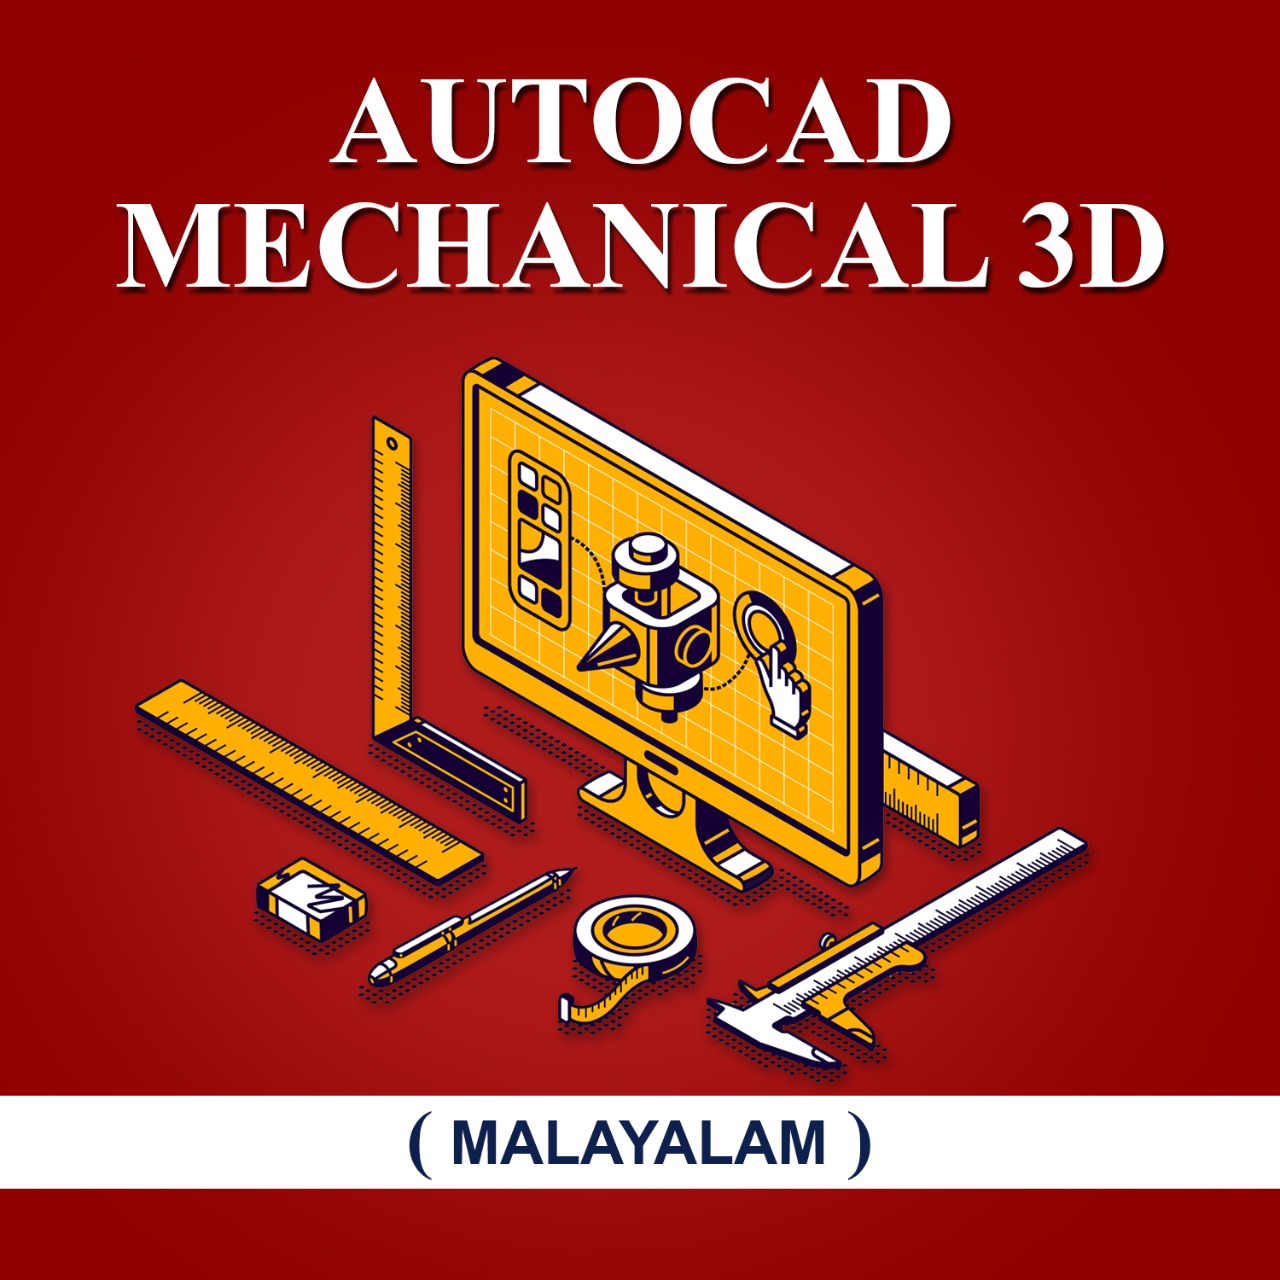 AutoCAD Mechanical 3D in Malayalam